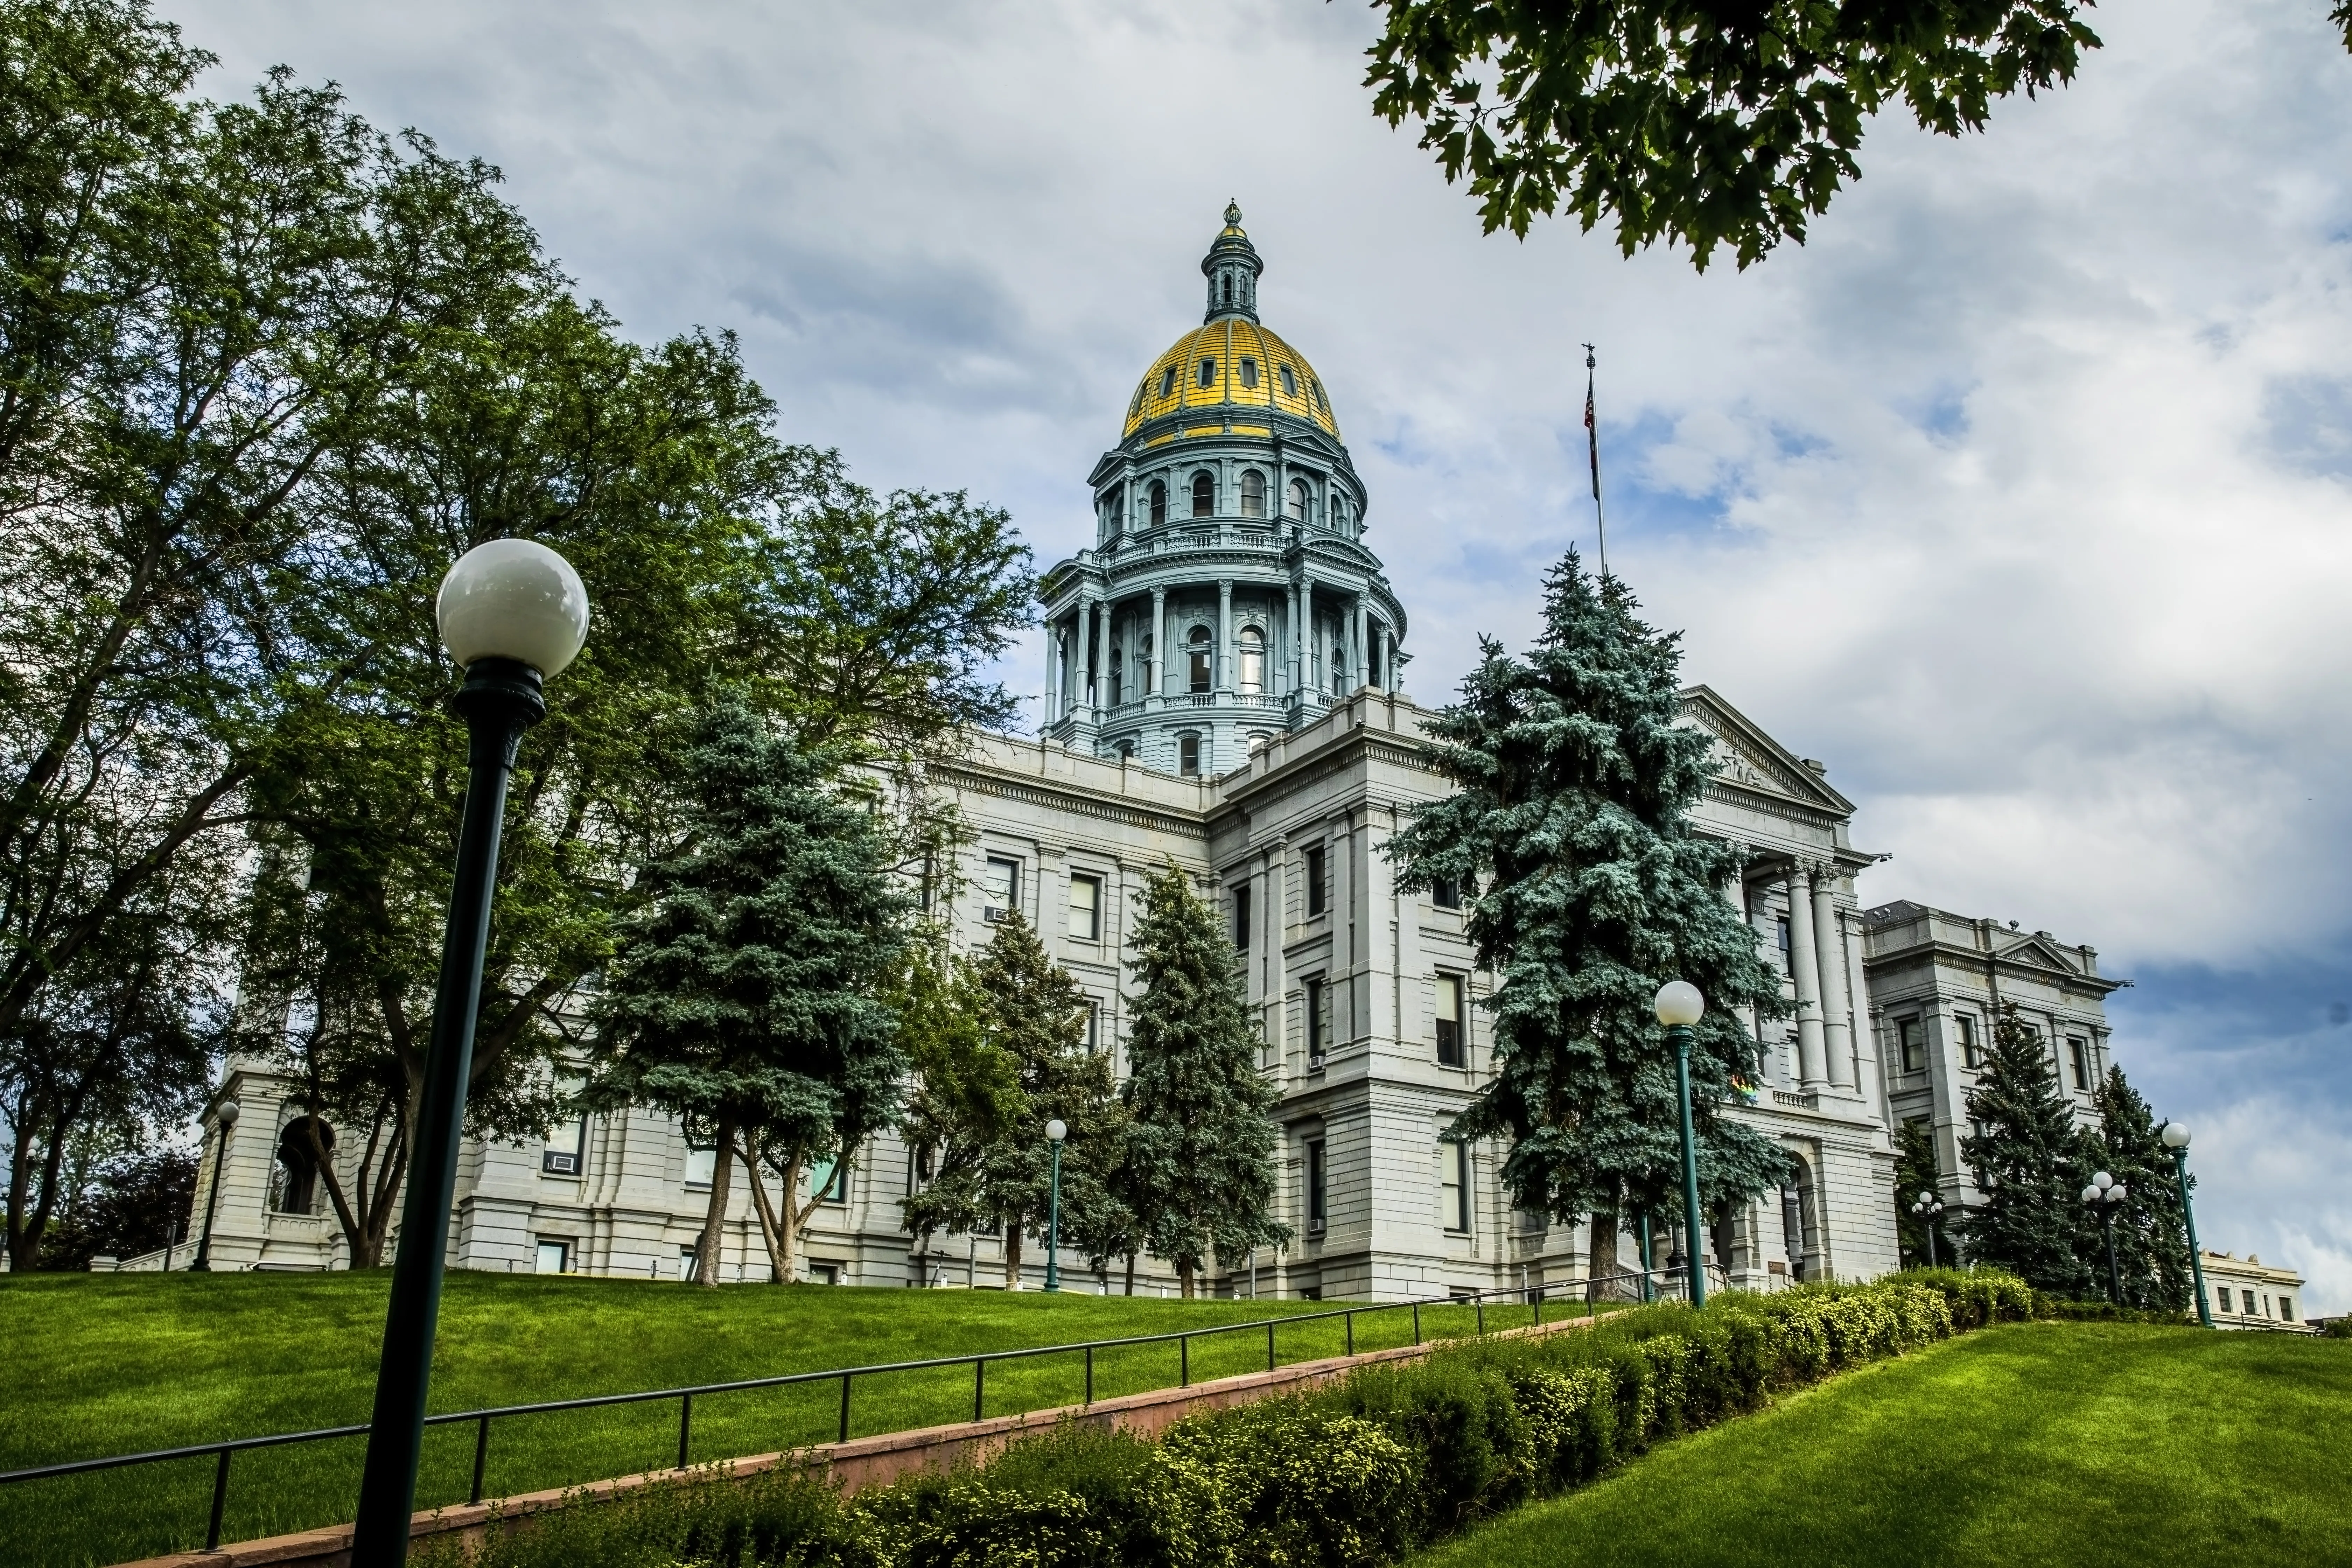 Colorado State Capitol building with green trees and golden dome.